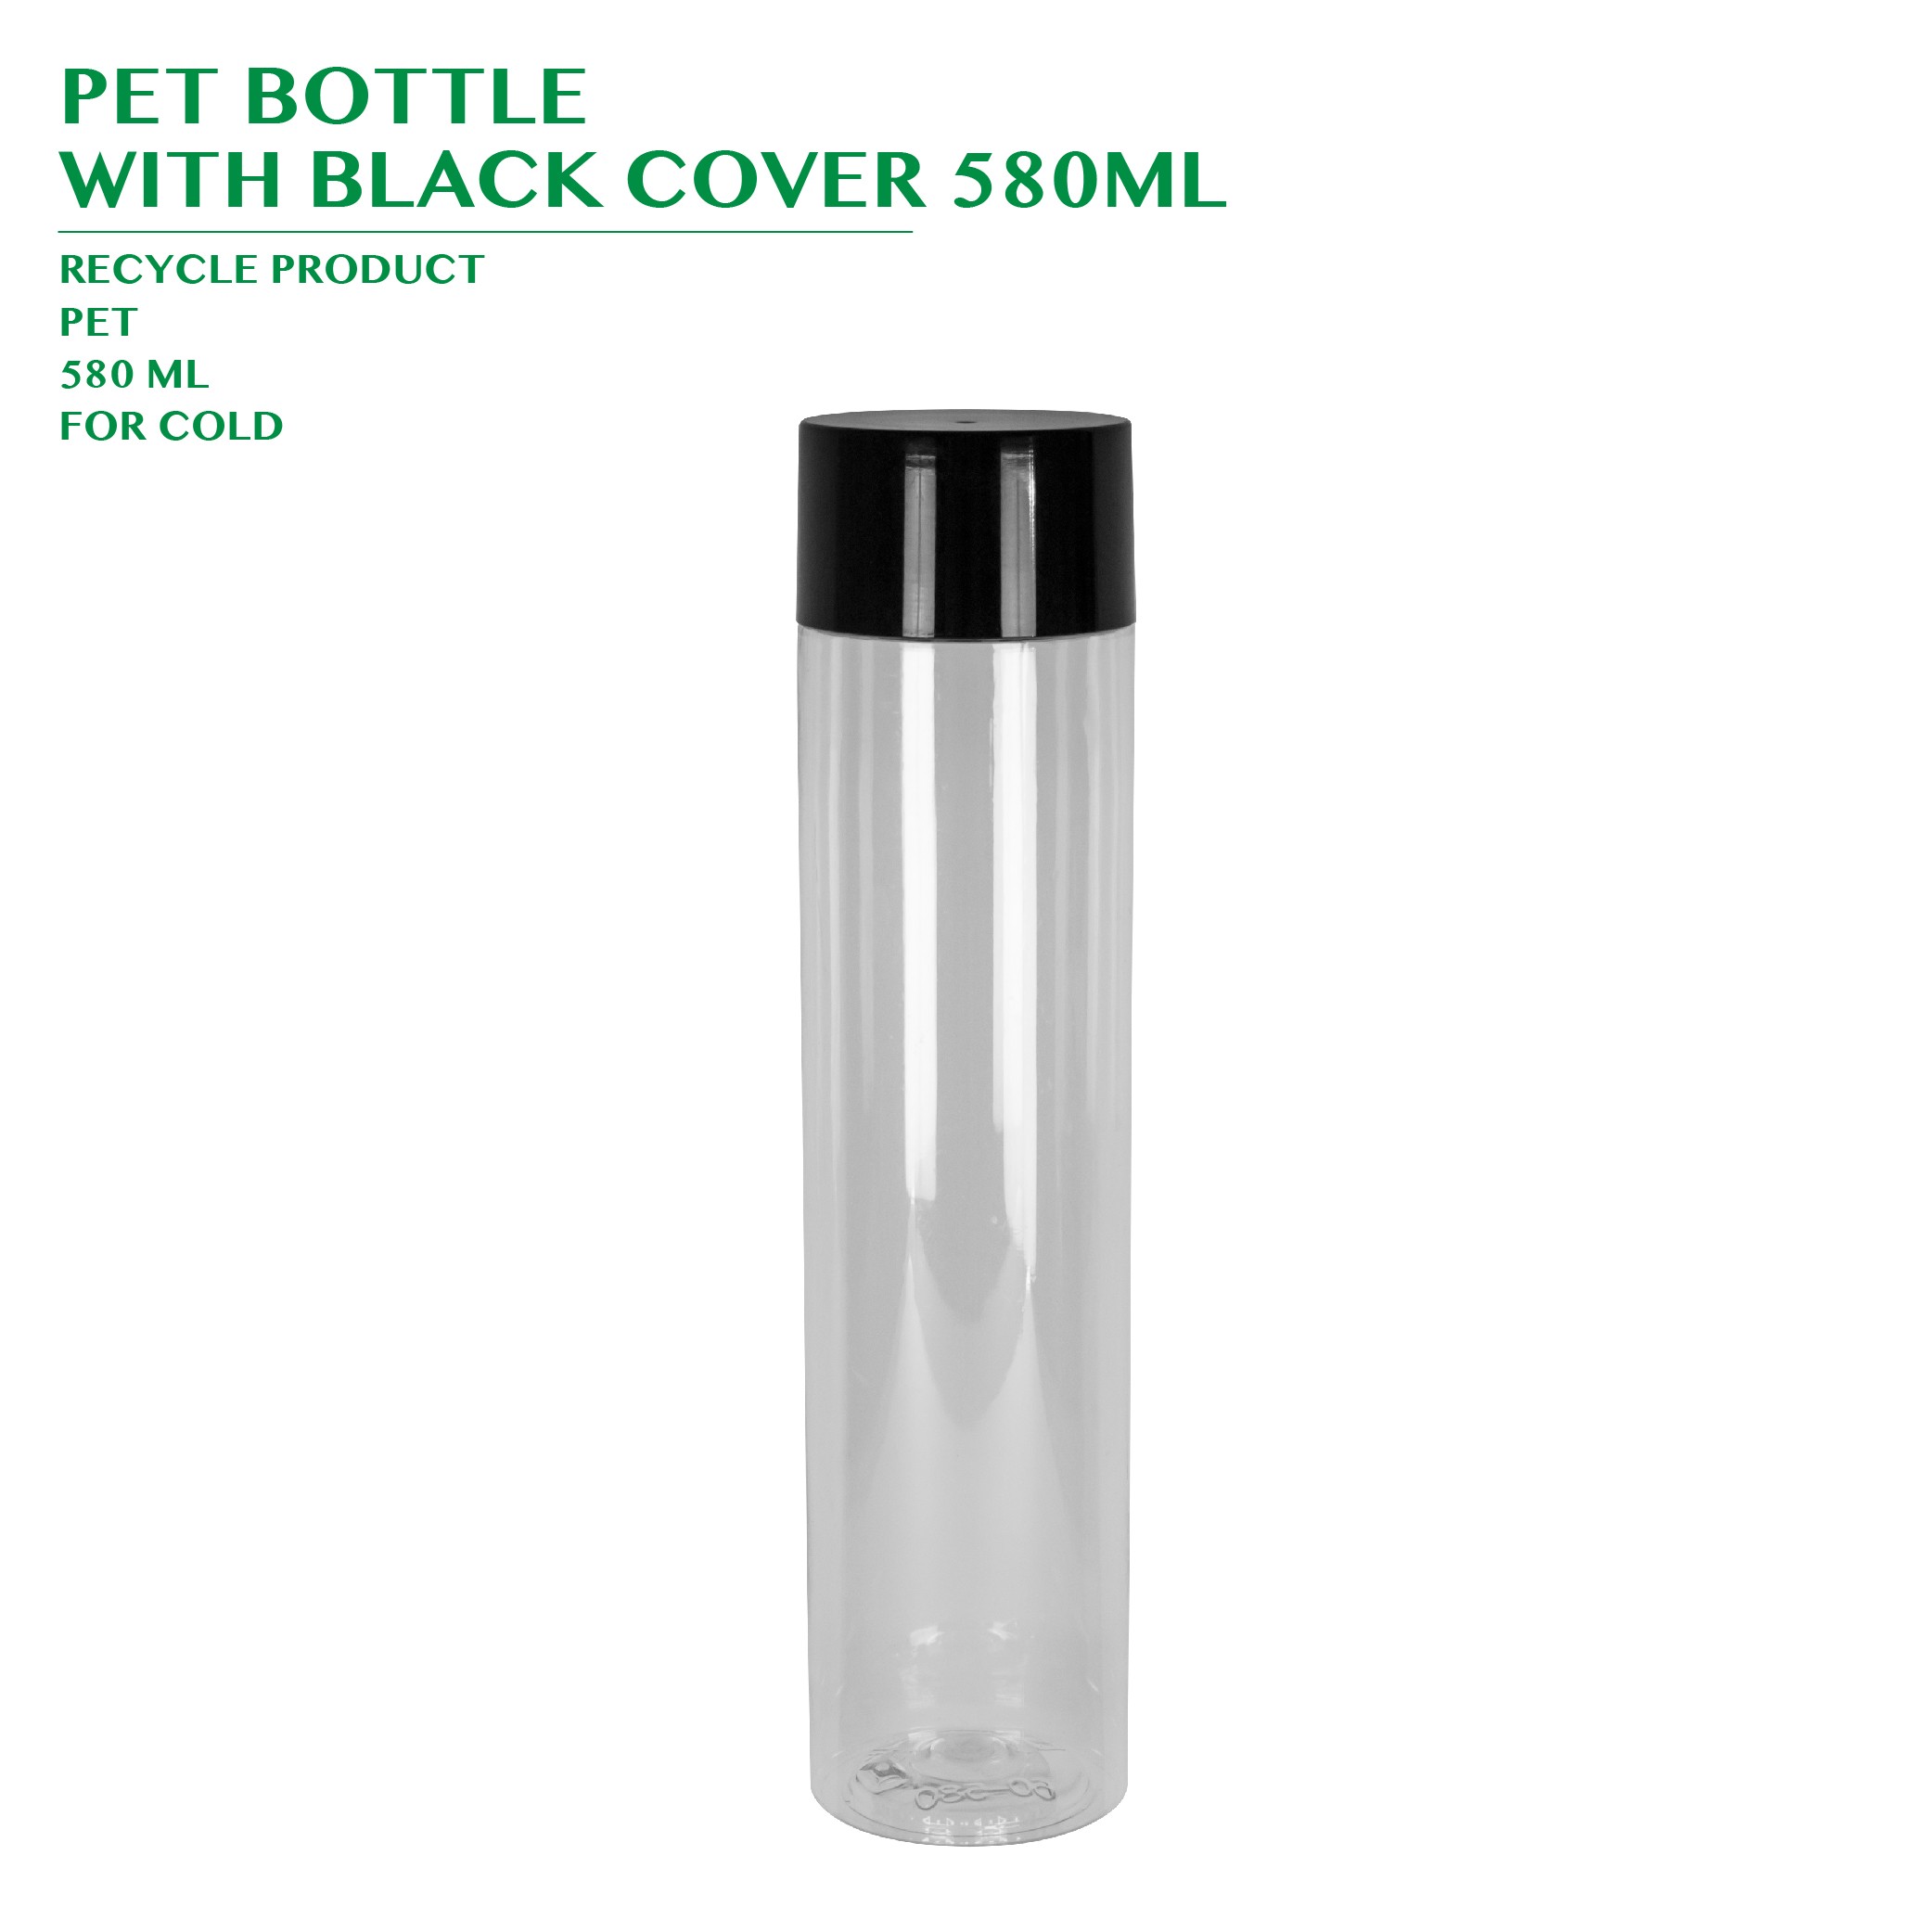 PRE-ORDER PET BOTTLE  WITH BLACK COVER 580ML